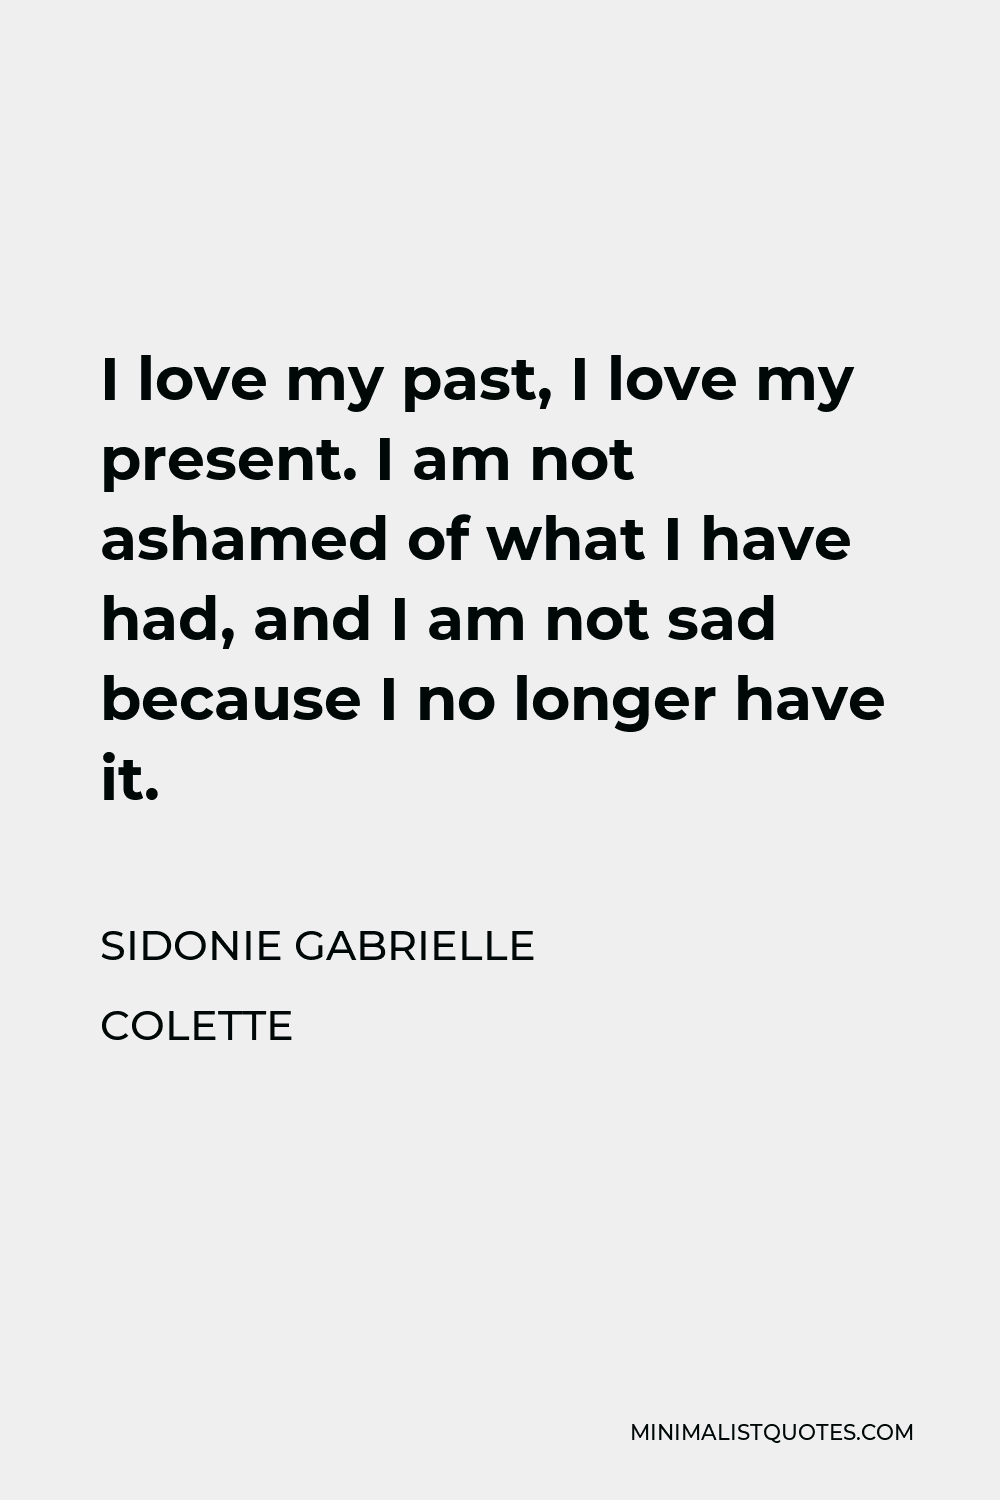 Sidonie Gabrielle Colette Quote - I love my past, I love my present. I am not ashamed of what I have had, and I am not sad because I no longer have it.